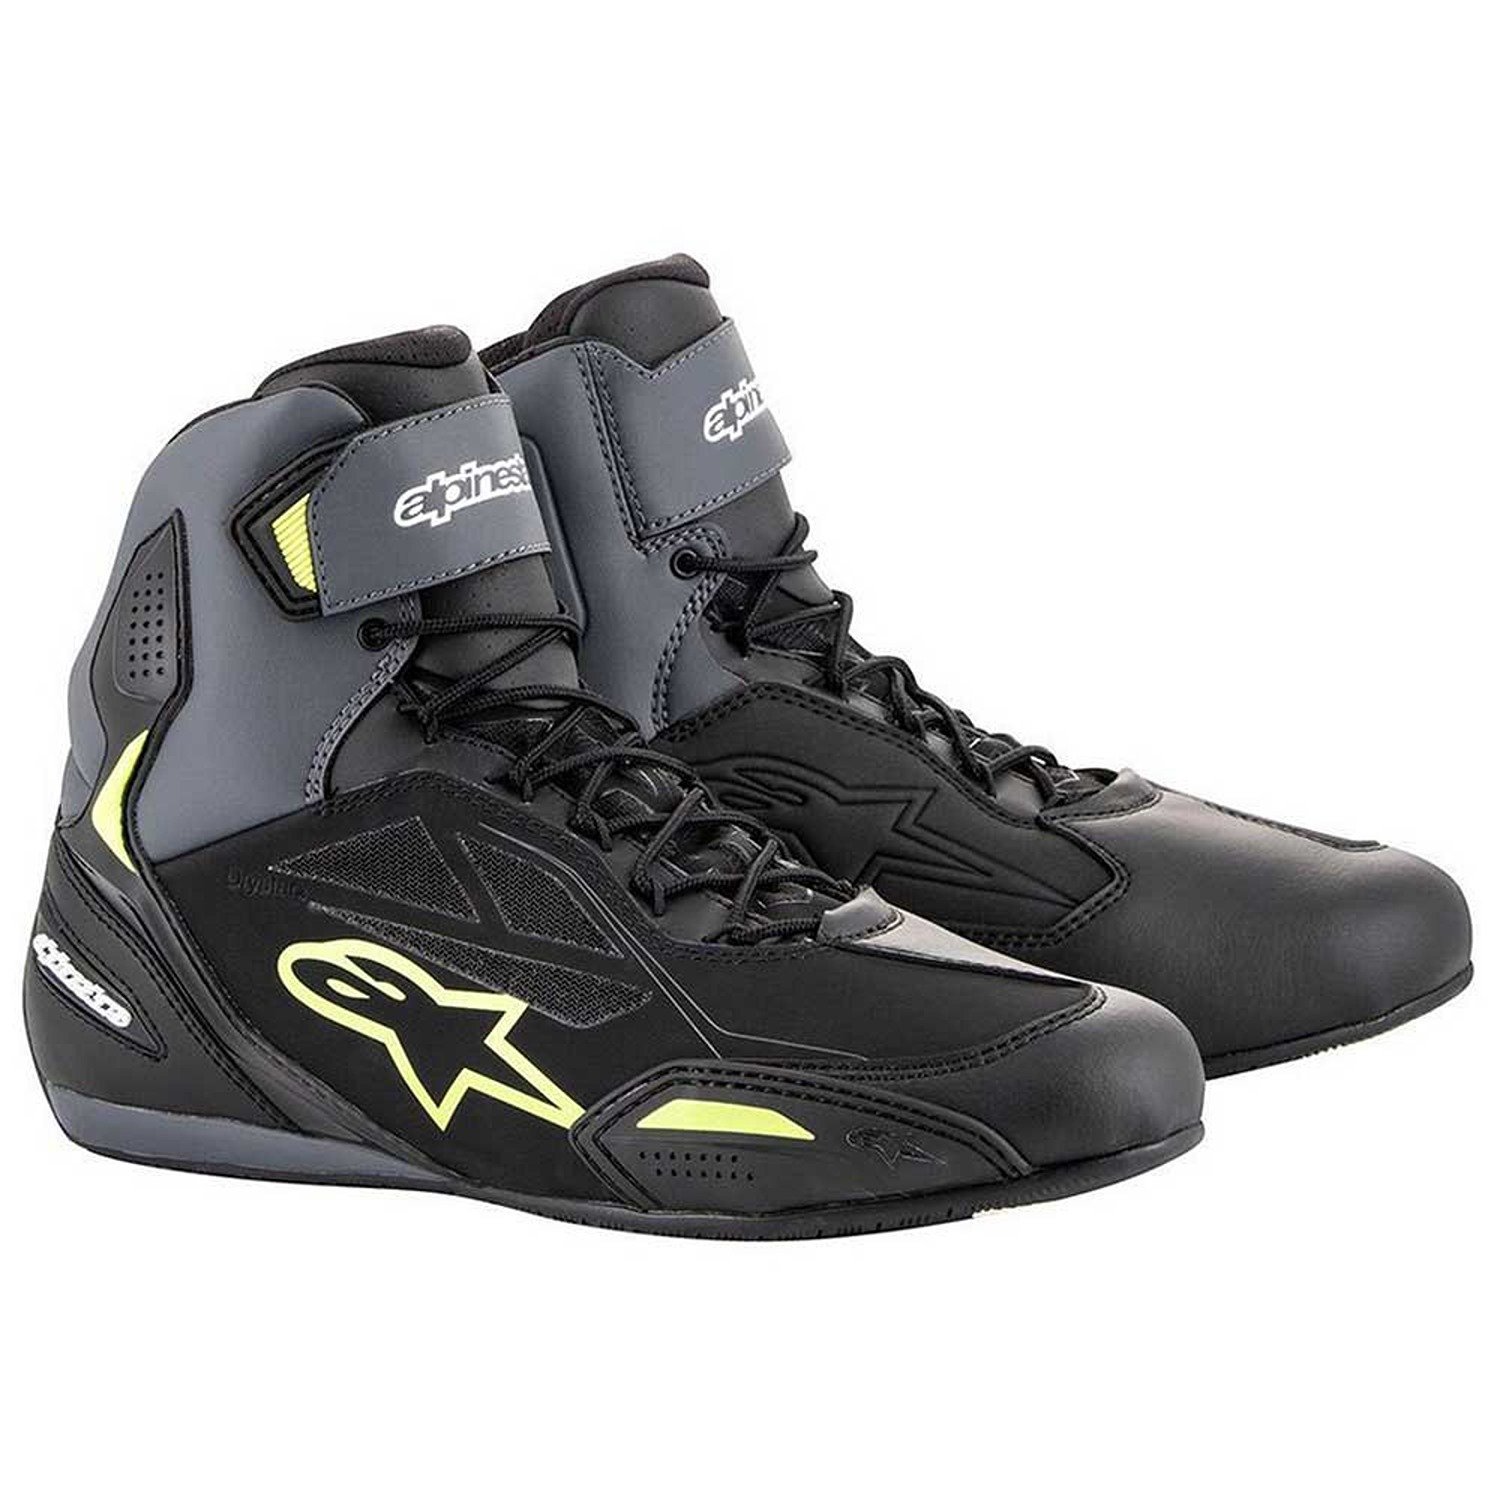 Image of EU Alpinestars Faster-3 Shoes Black Yellow Fluo Taille US 95